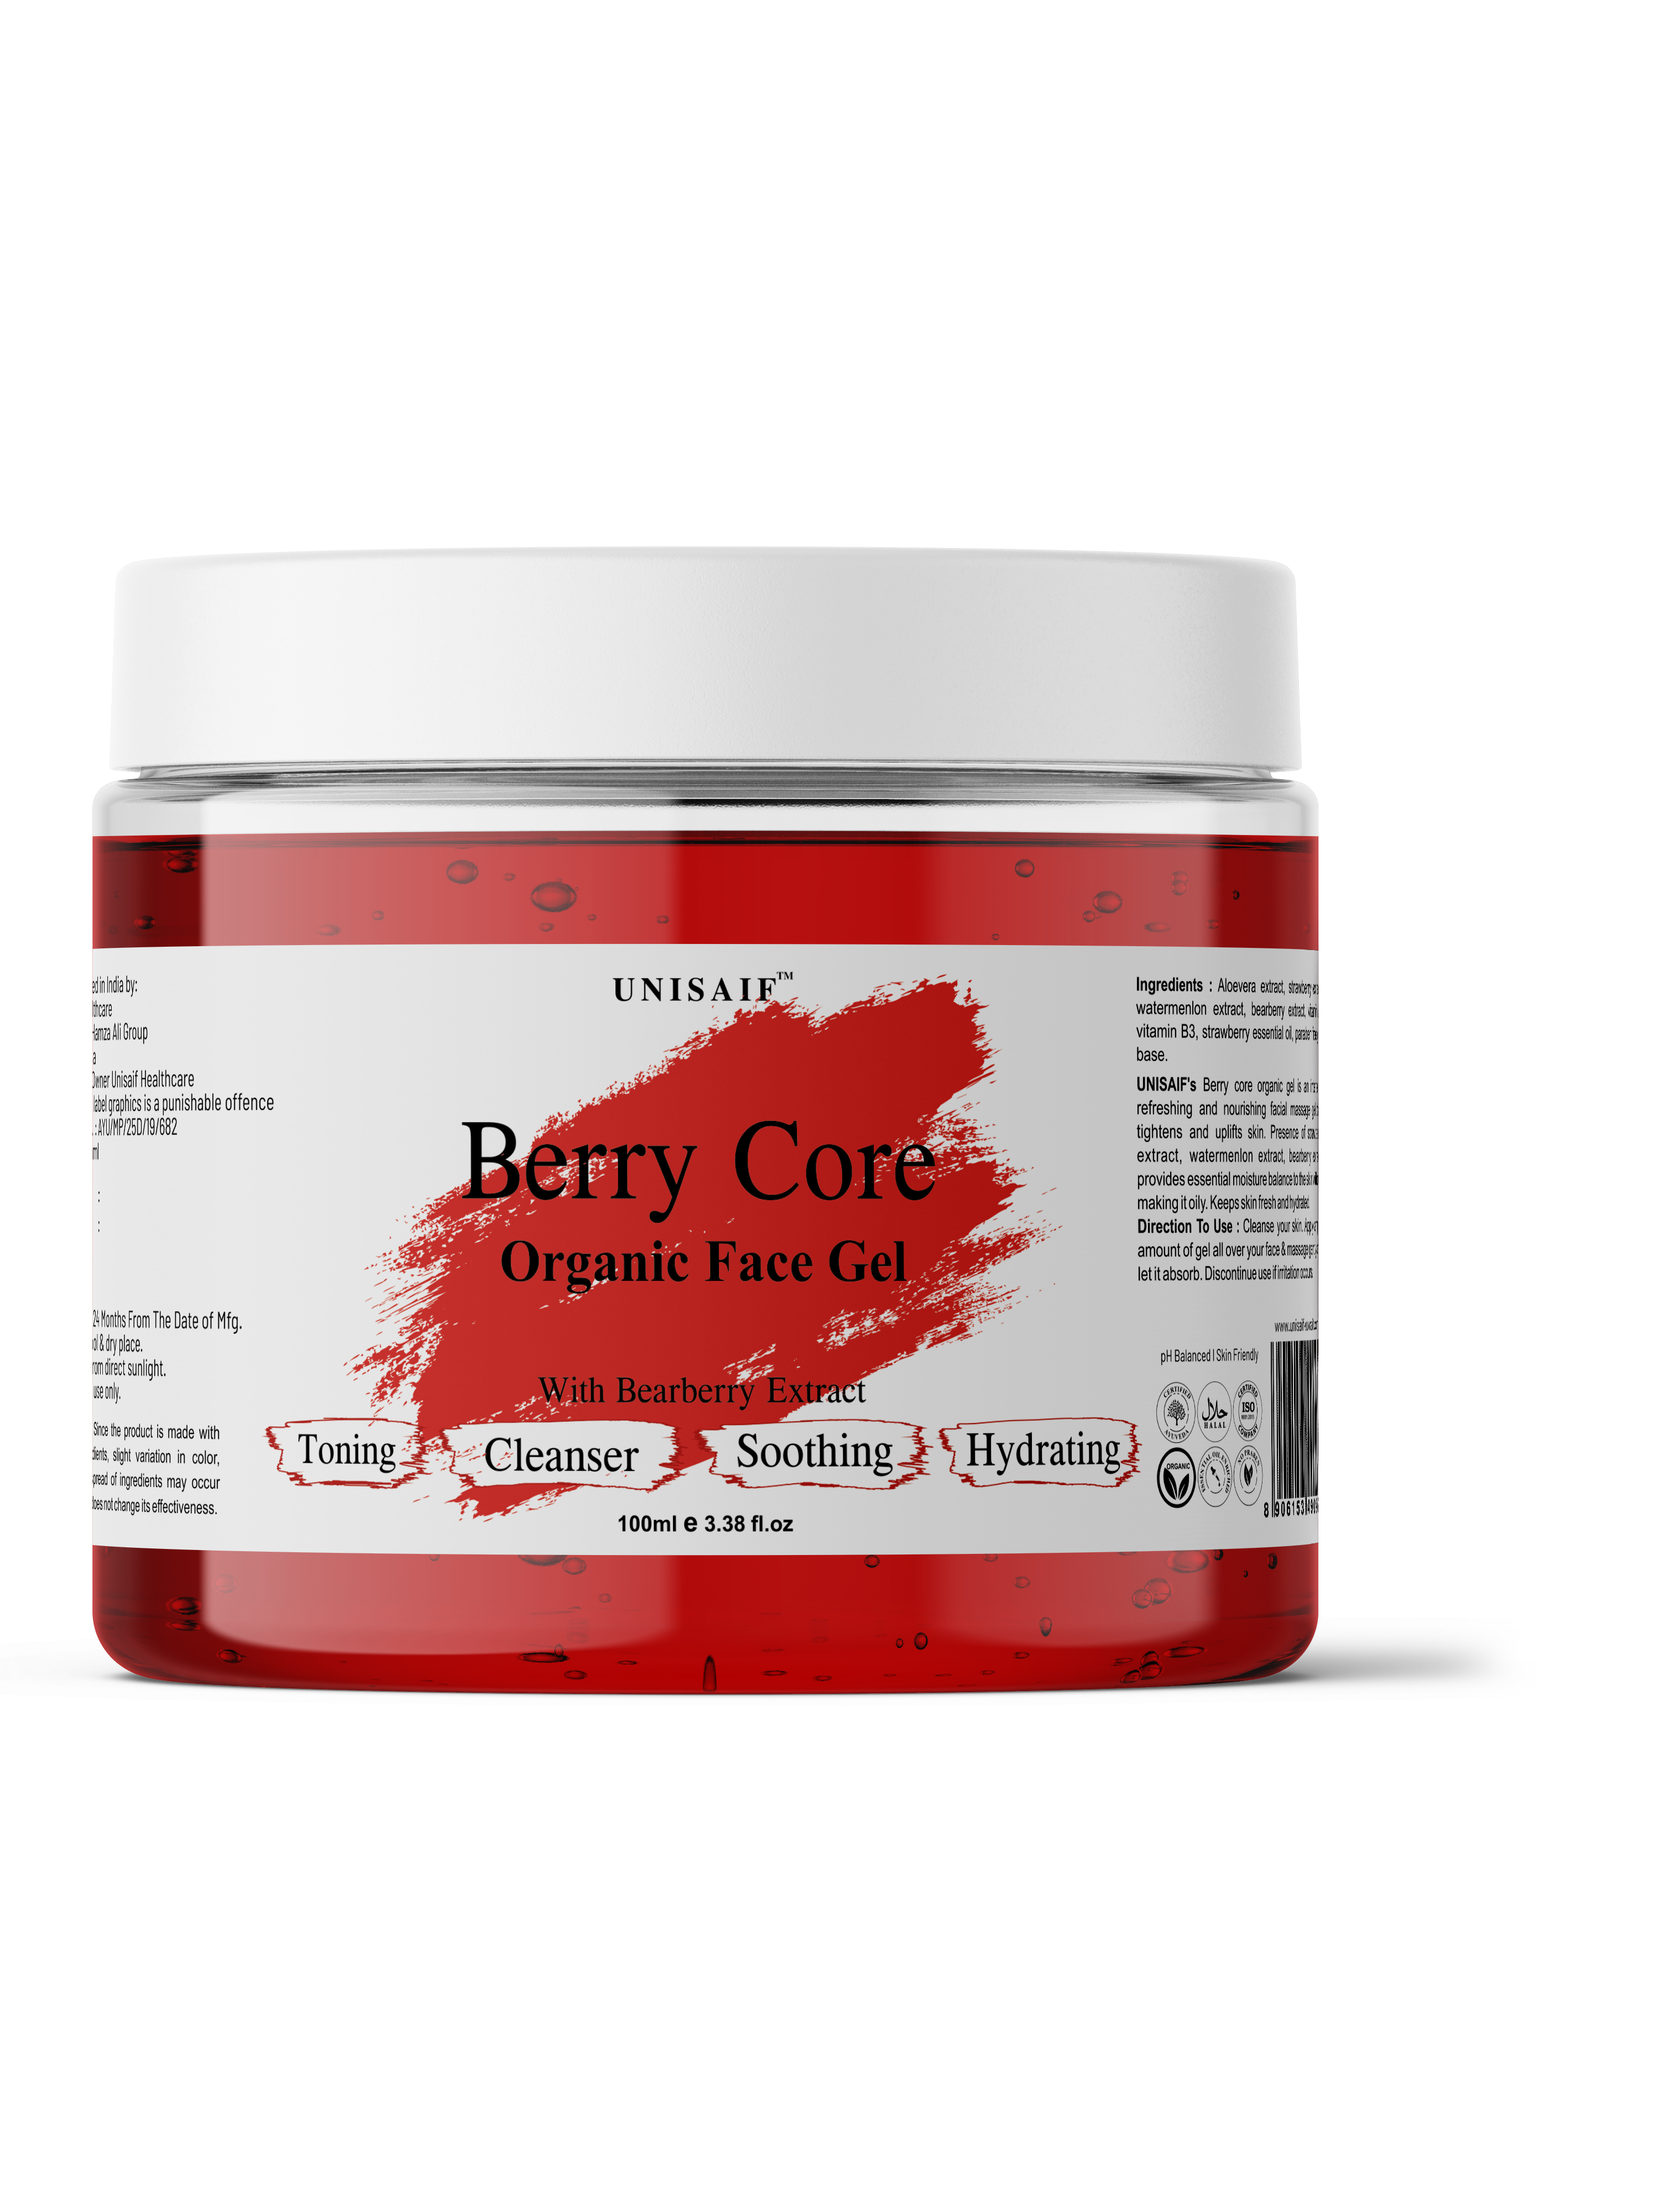 Berry Core Organic Facial Gel (100g) With Bearberry Extracts | Skin Toning| Cleansing| Soothing| Hydration| NO PARABEN NO SULPHATE